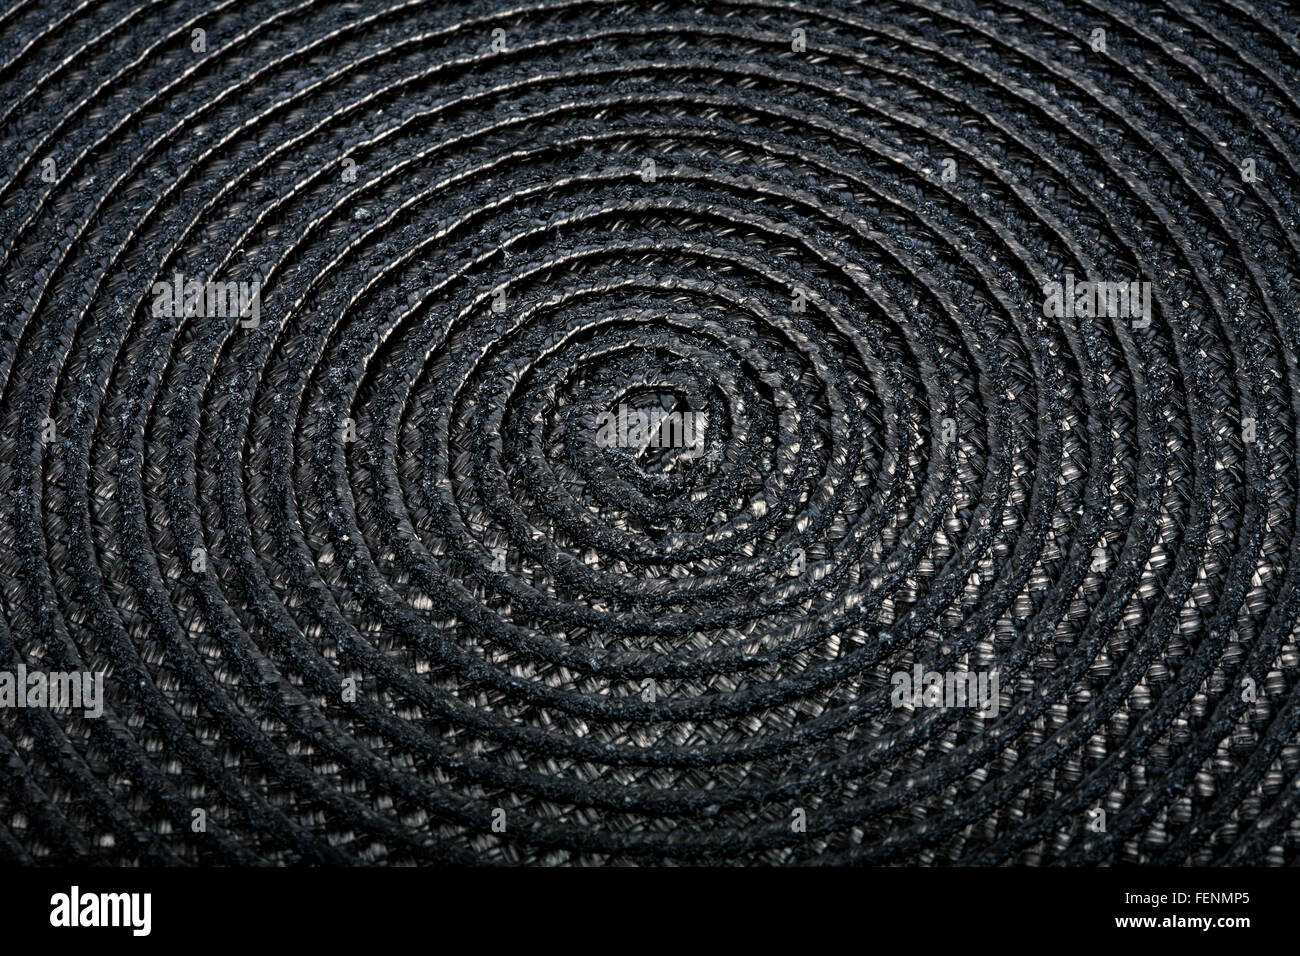 Carbon fiber weave lined textured background Stock Photo